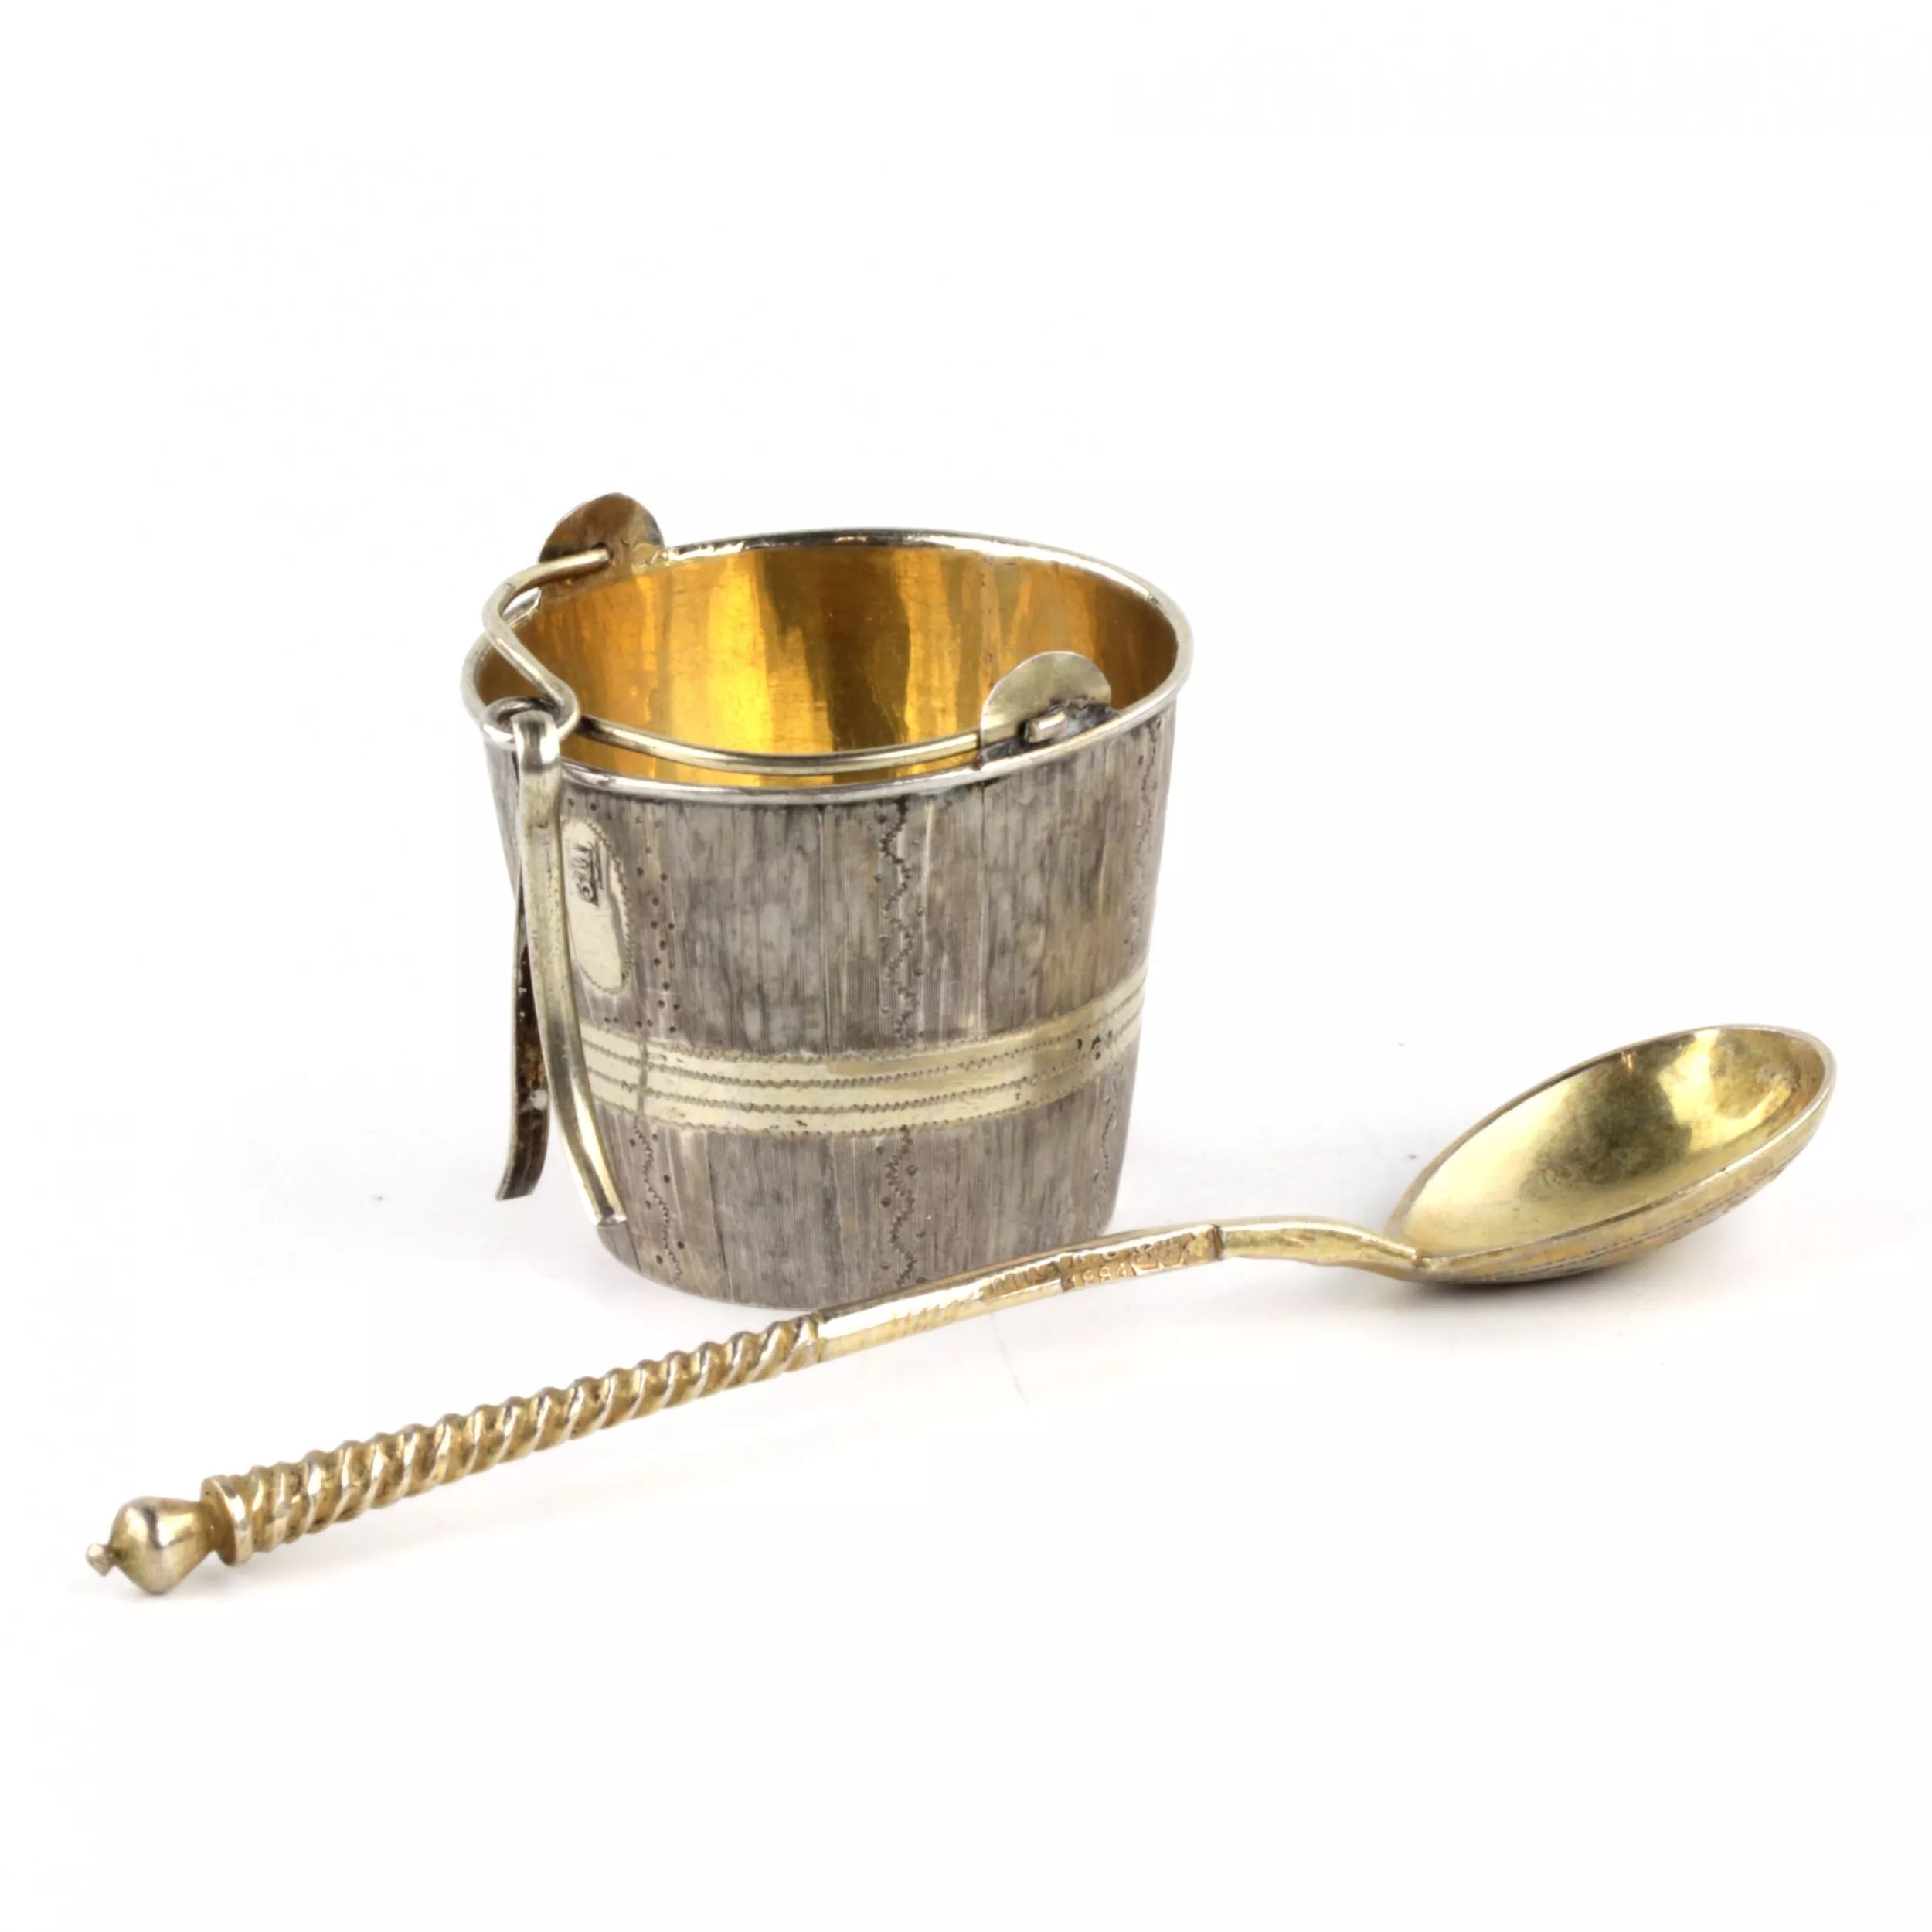 A-spoon-and-tea-strainer-Savinkov-Victor-Russia-Moscow-1884-